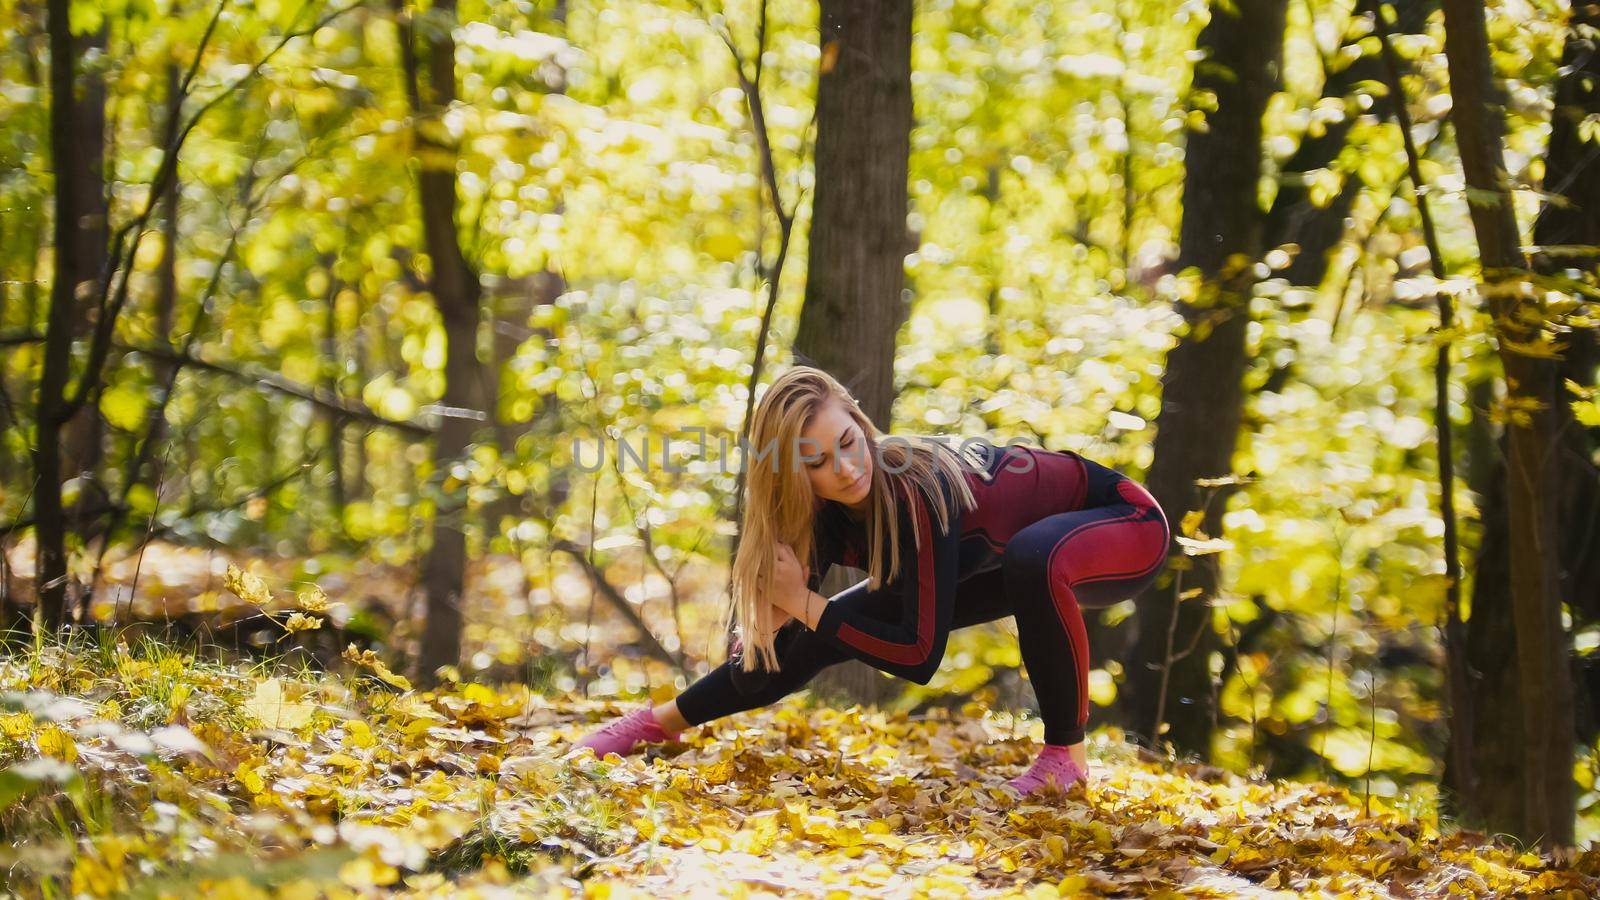 Woman doing fitness exercises outdoor. Female stretching in autumn forest. Slim girl at outdoor workout - squats, telephoto